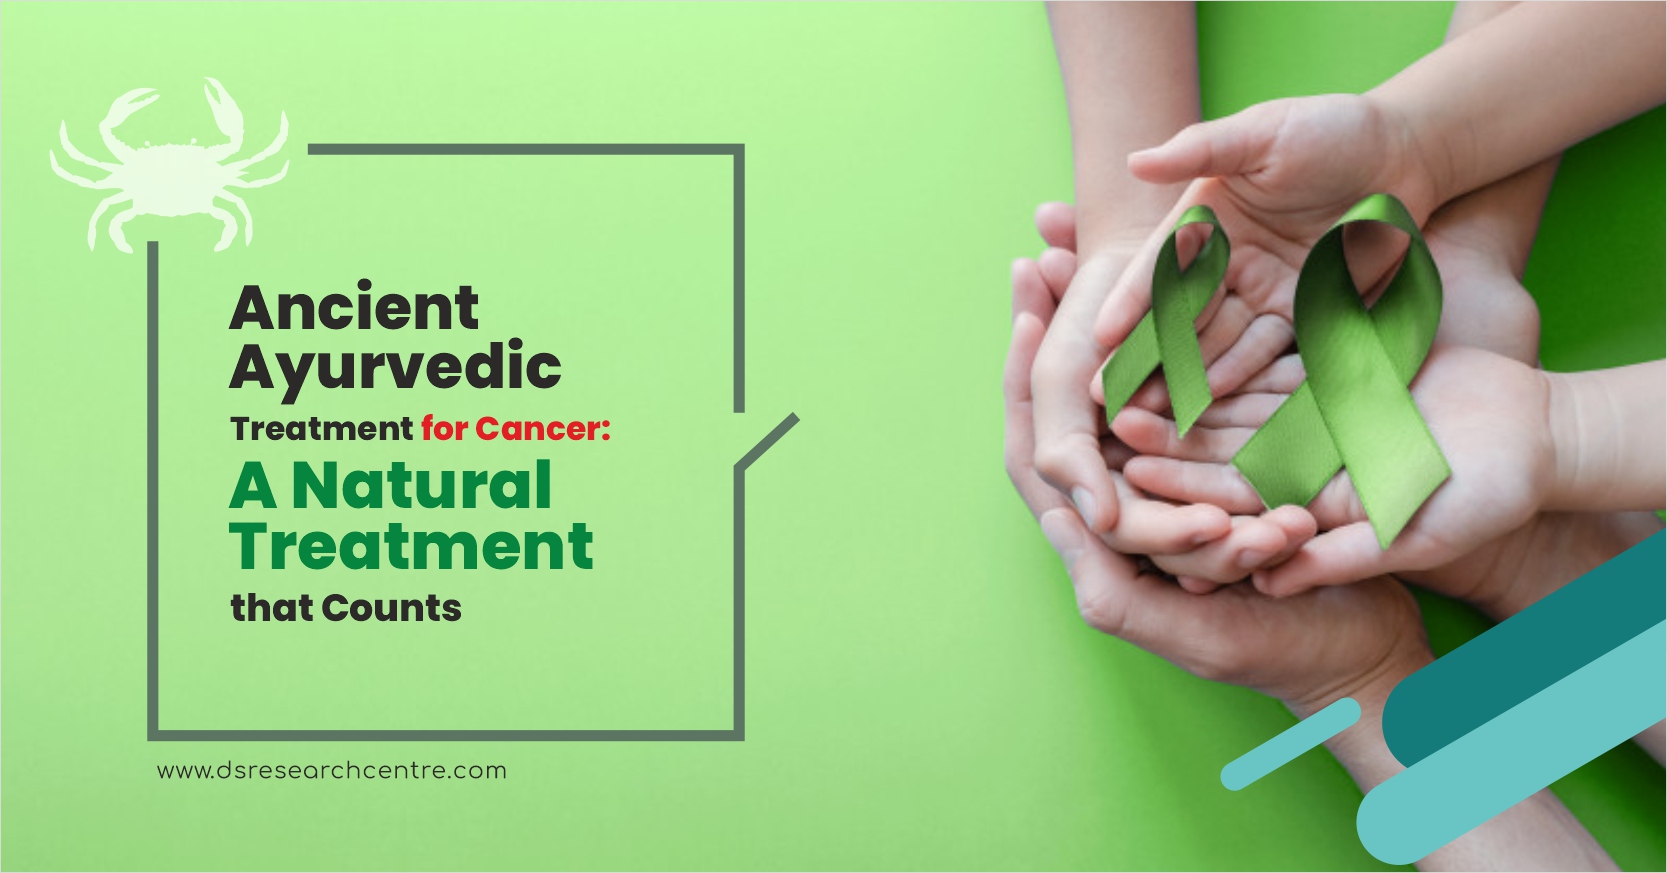 Ayurvedic Treatment for Cancer: A Natural Treatment that Counts